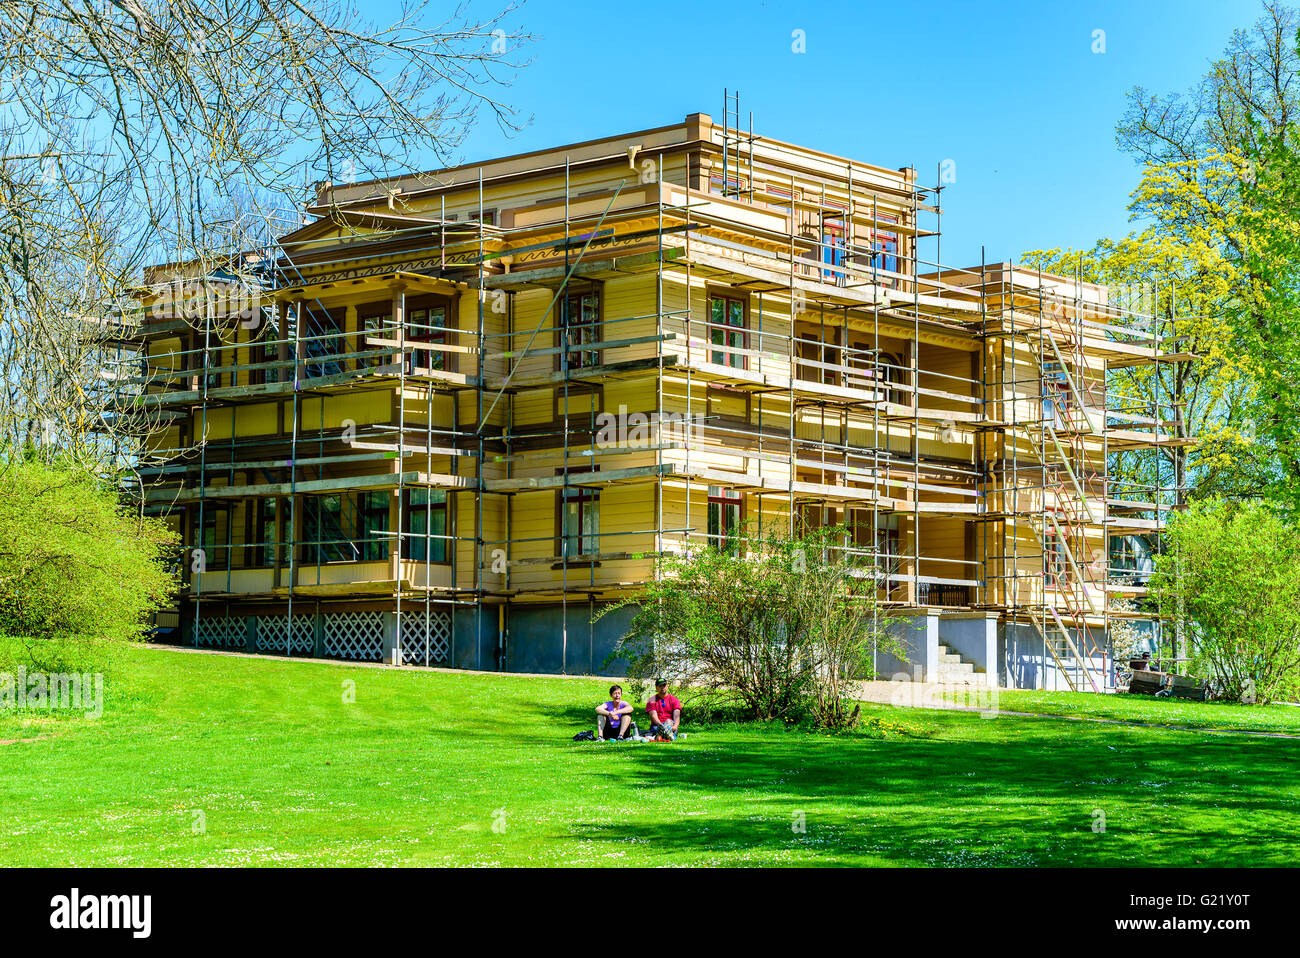 Ronneby, Sweden - May 8, 2016: Scaffoldings around the Italian villa. Two persons resting on a blanket in front of the house. Stock Photo